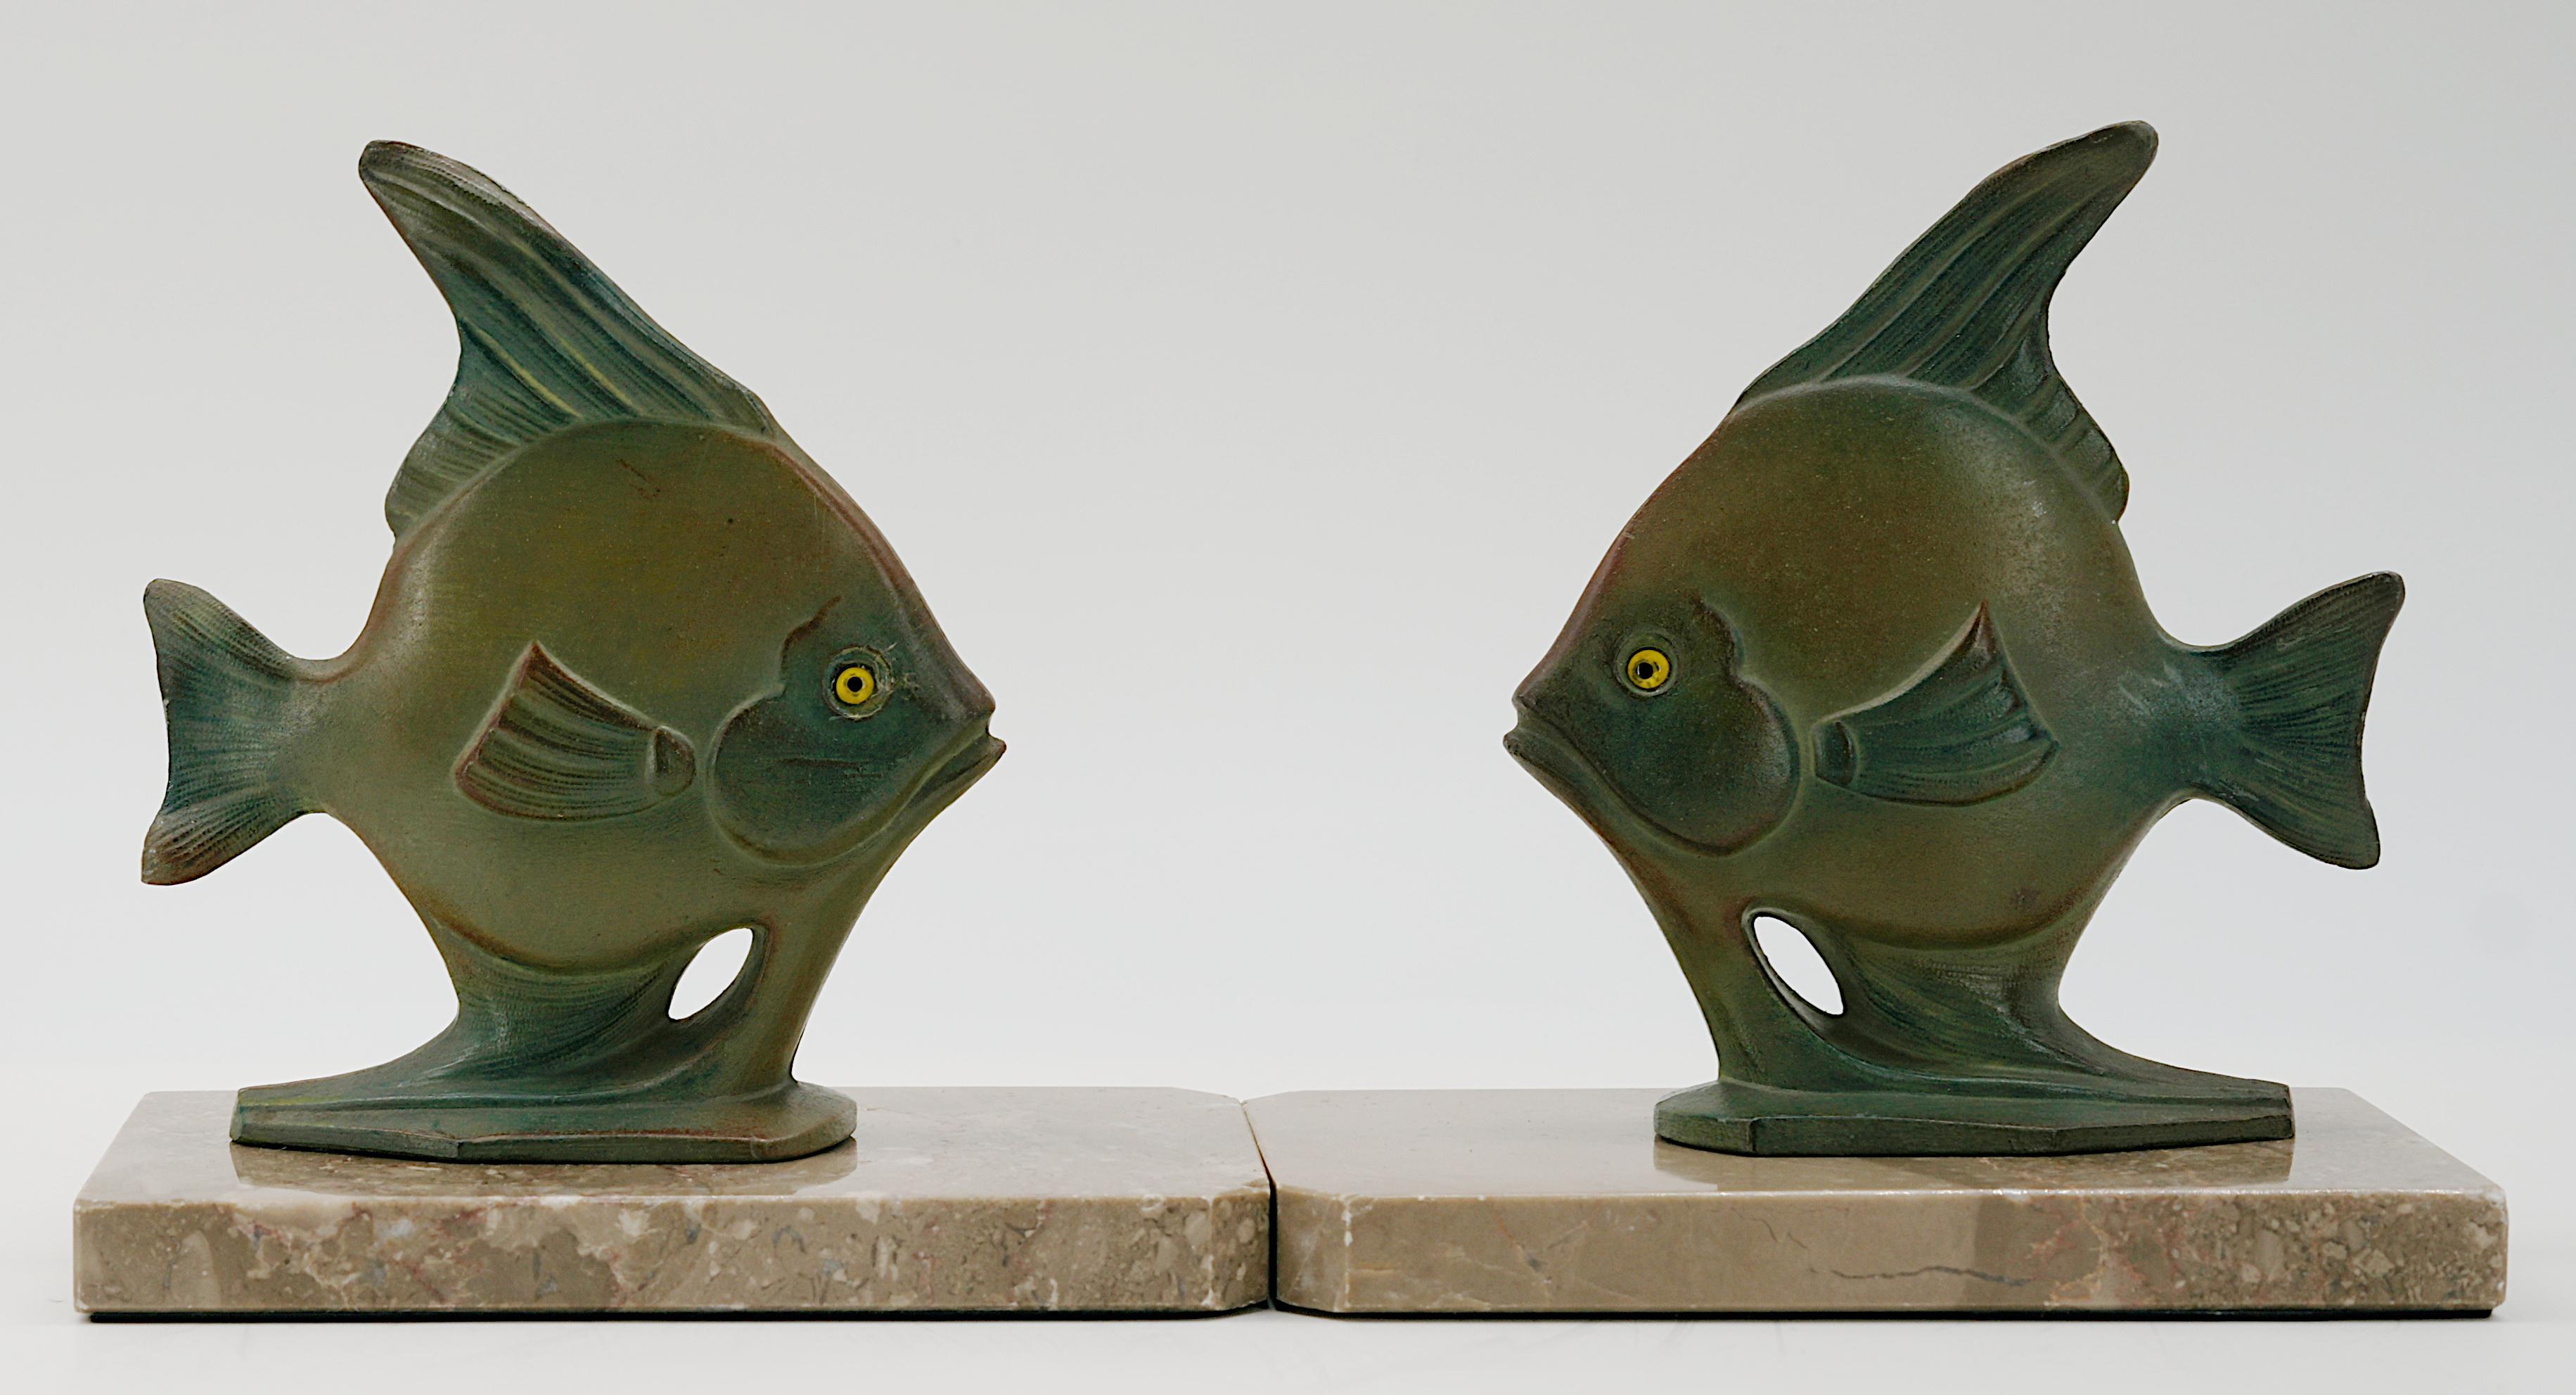 French Art Deco bookends, France, ca.1930. Two fishes. Spelter, glass and marble. Each - Height: 5.5